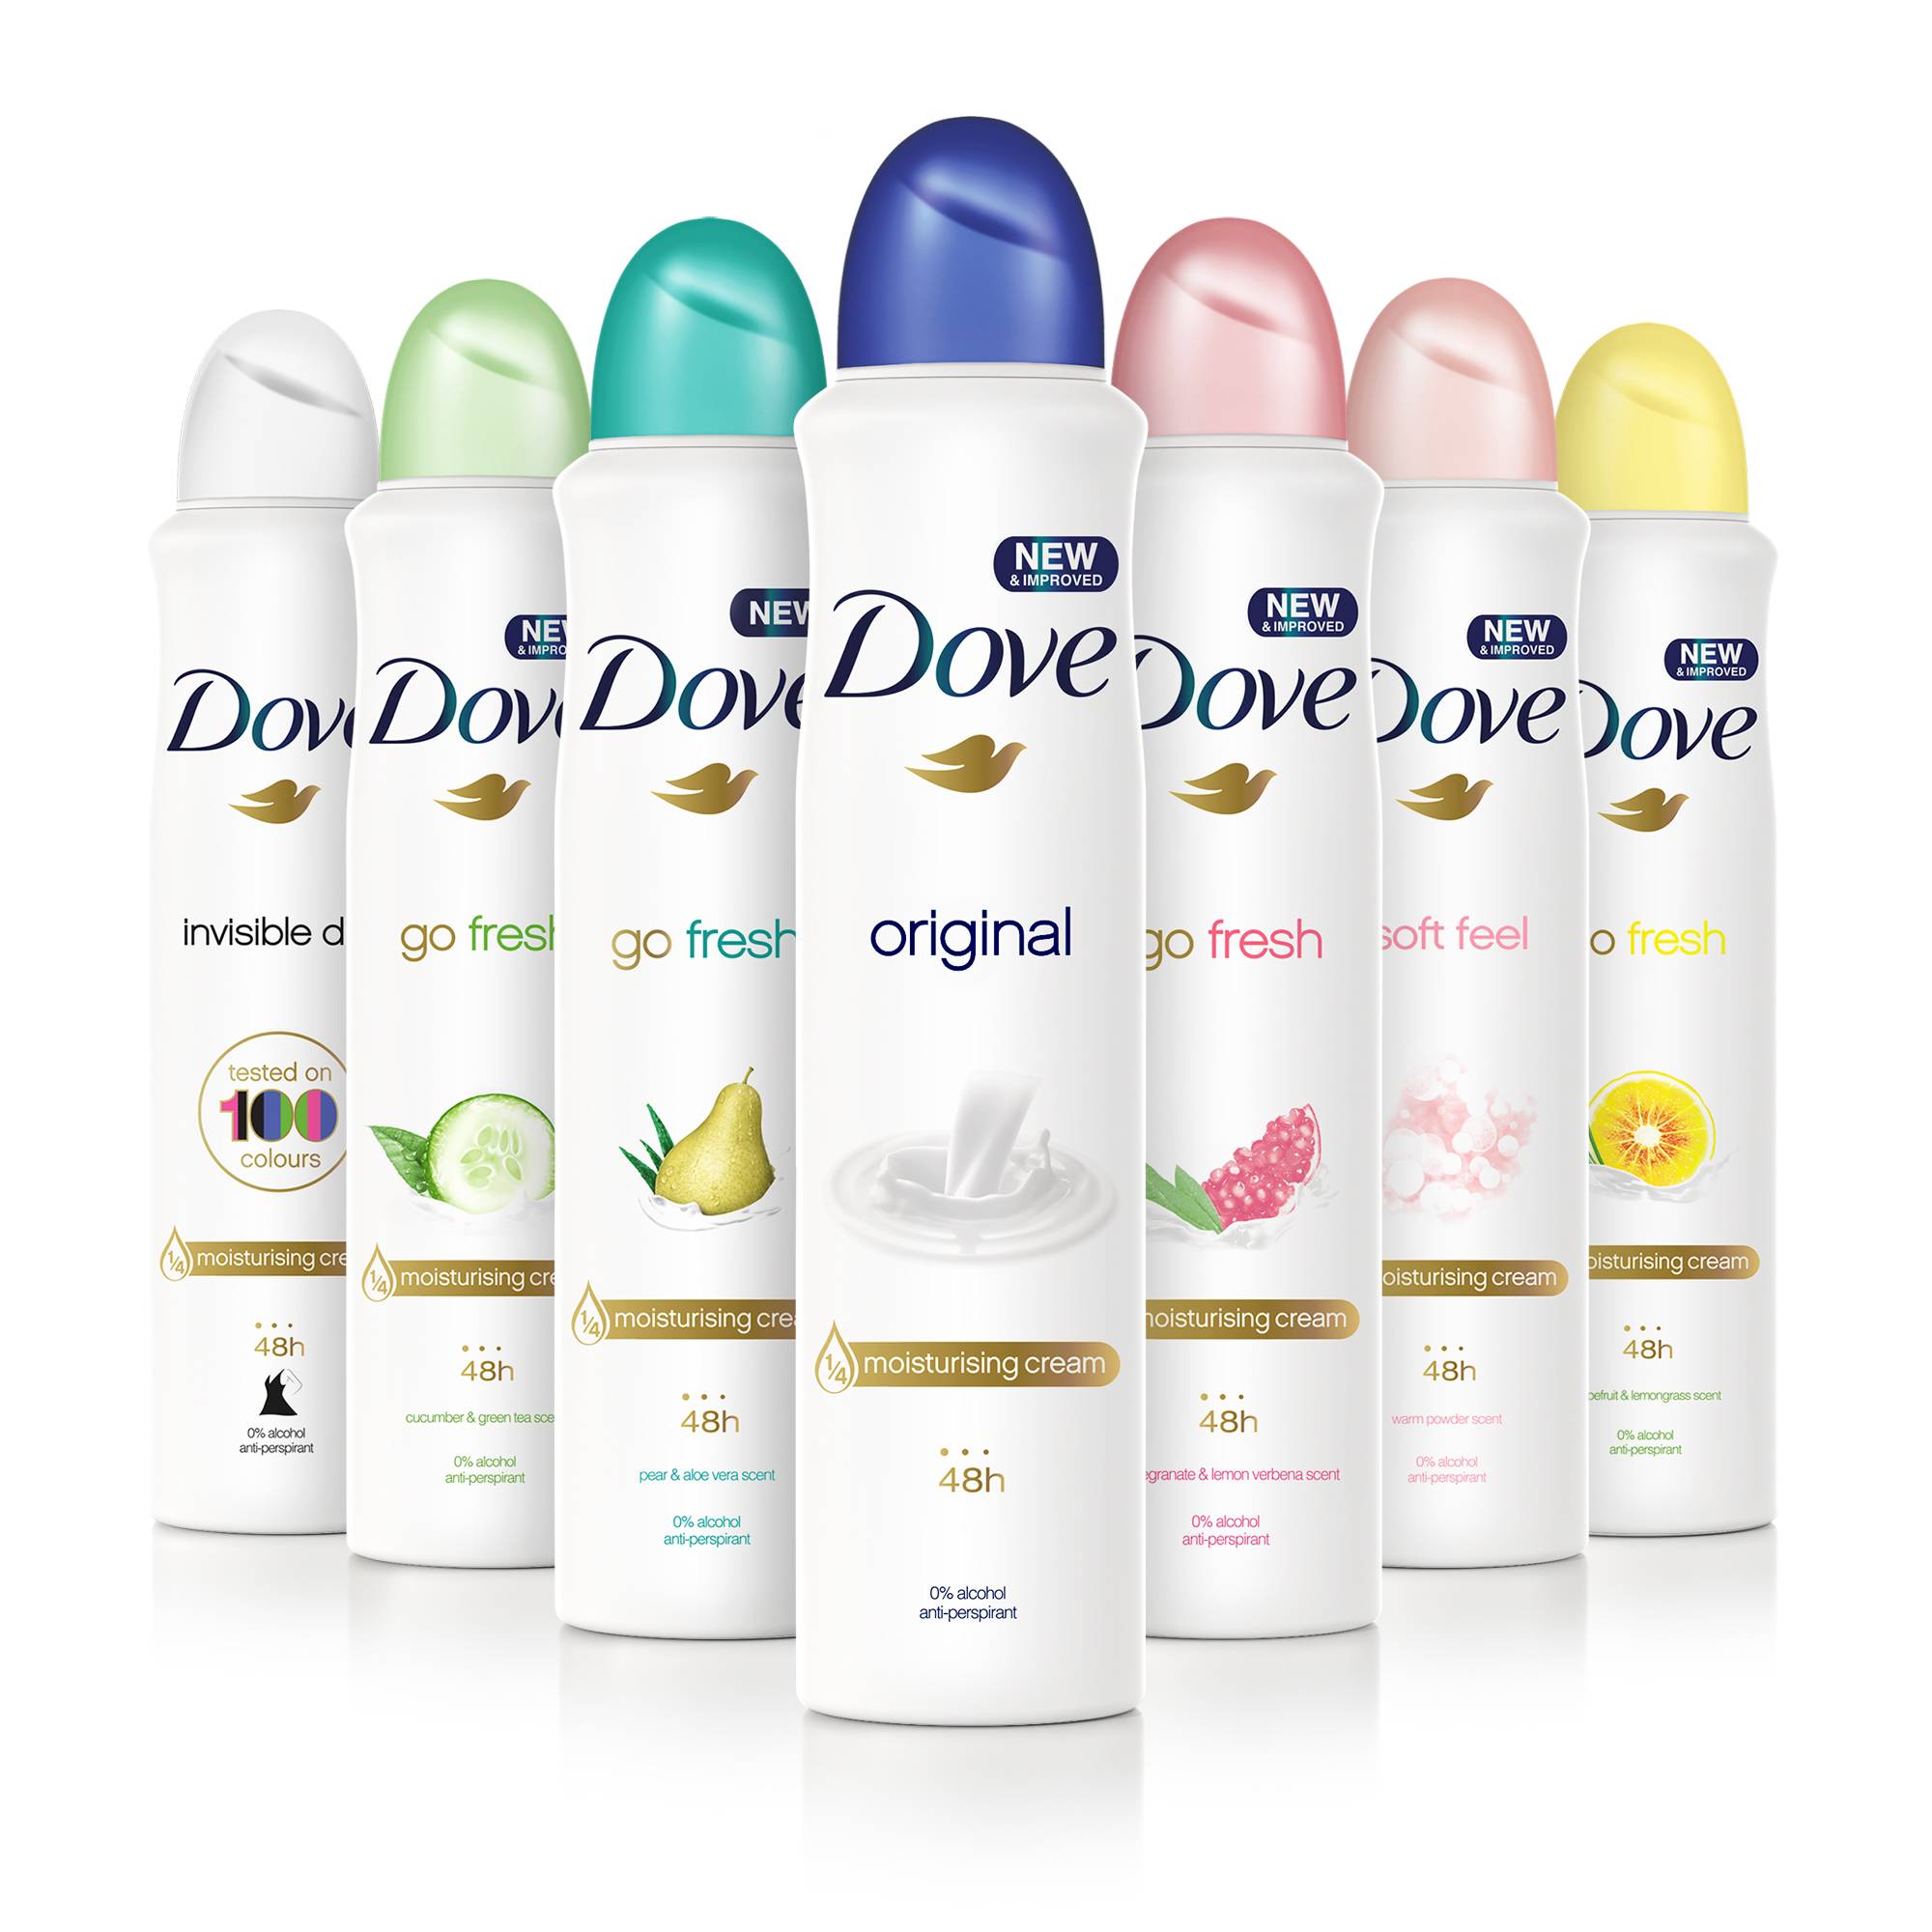 New formula and brand refresh for Dove